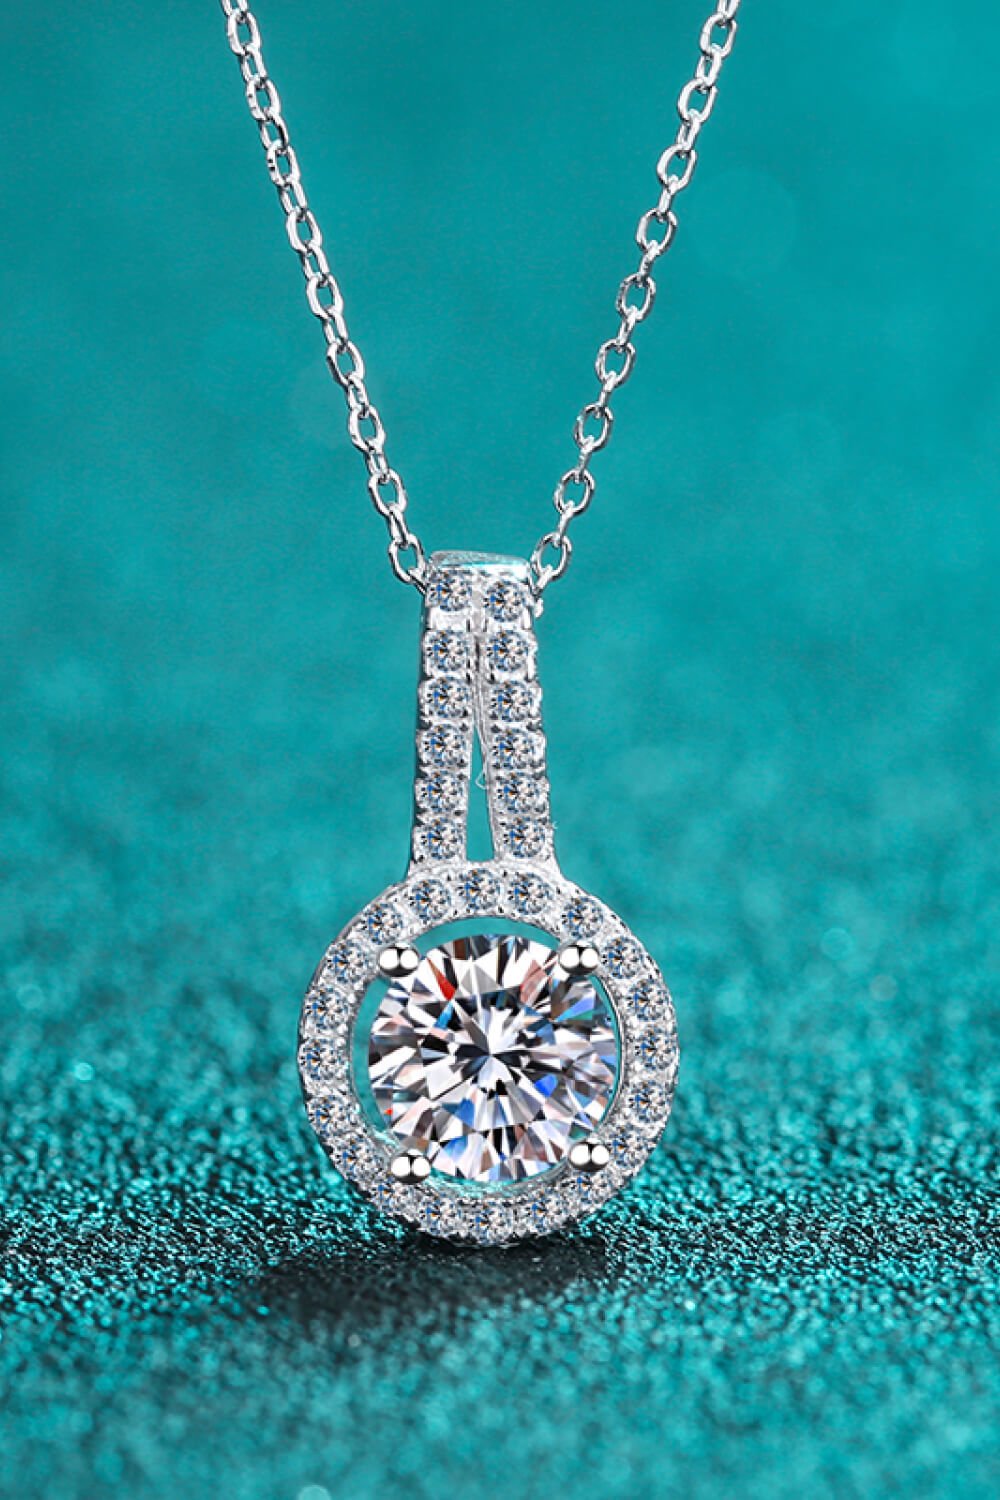 Women's Build You Up Moissanite Round Pendant Chain Necklace